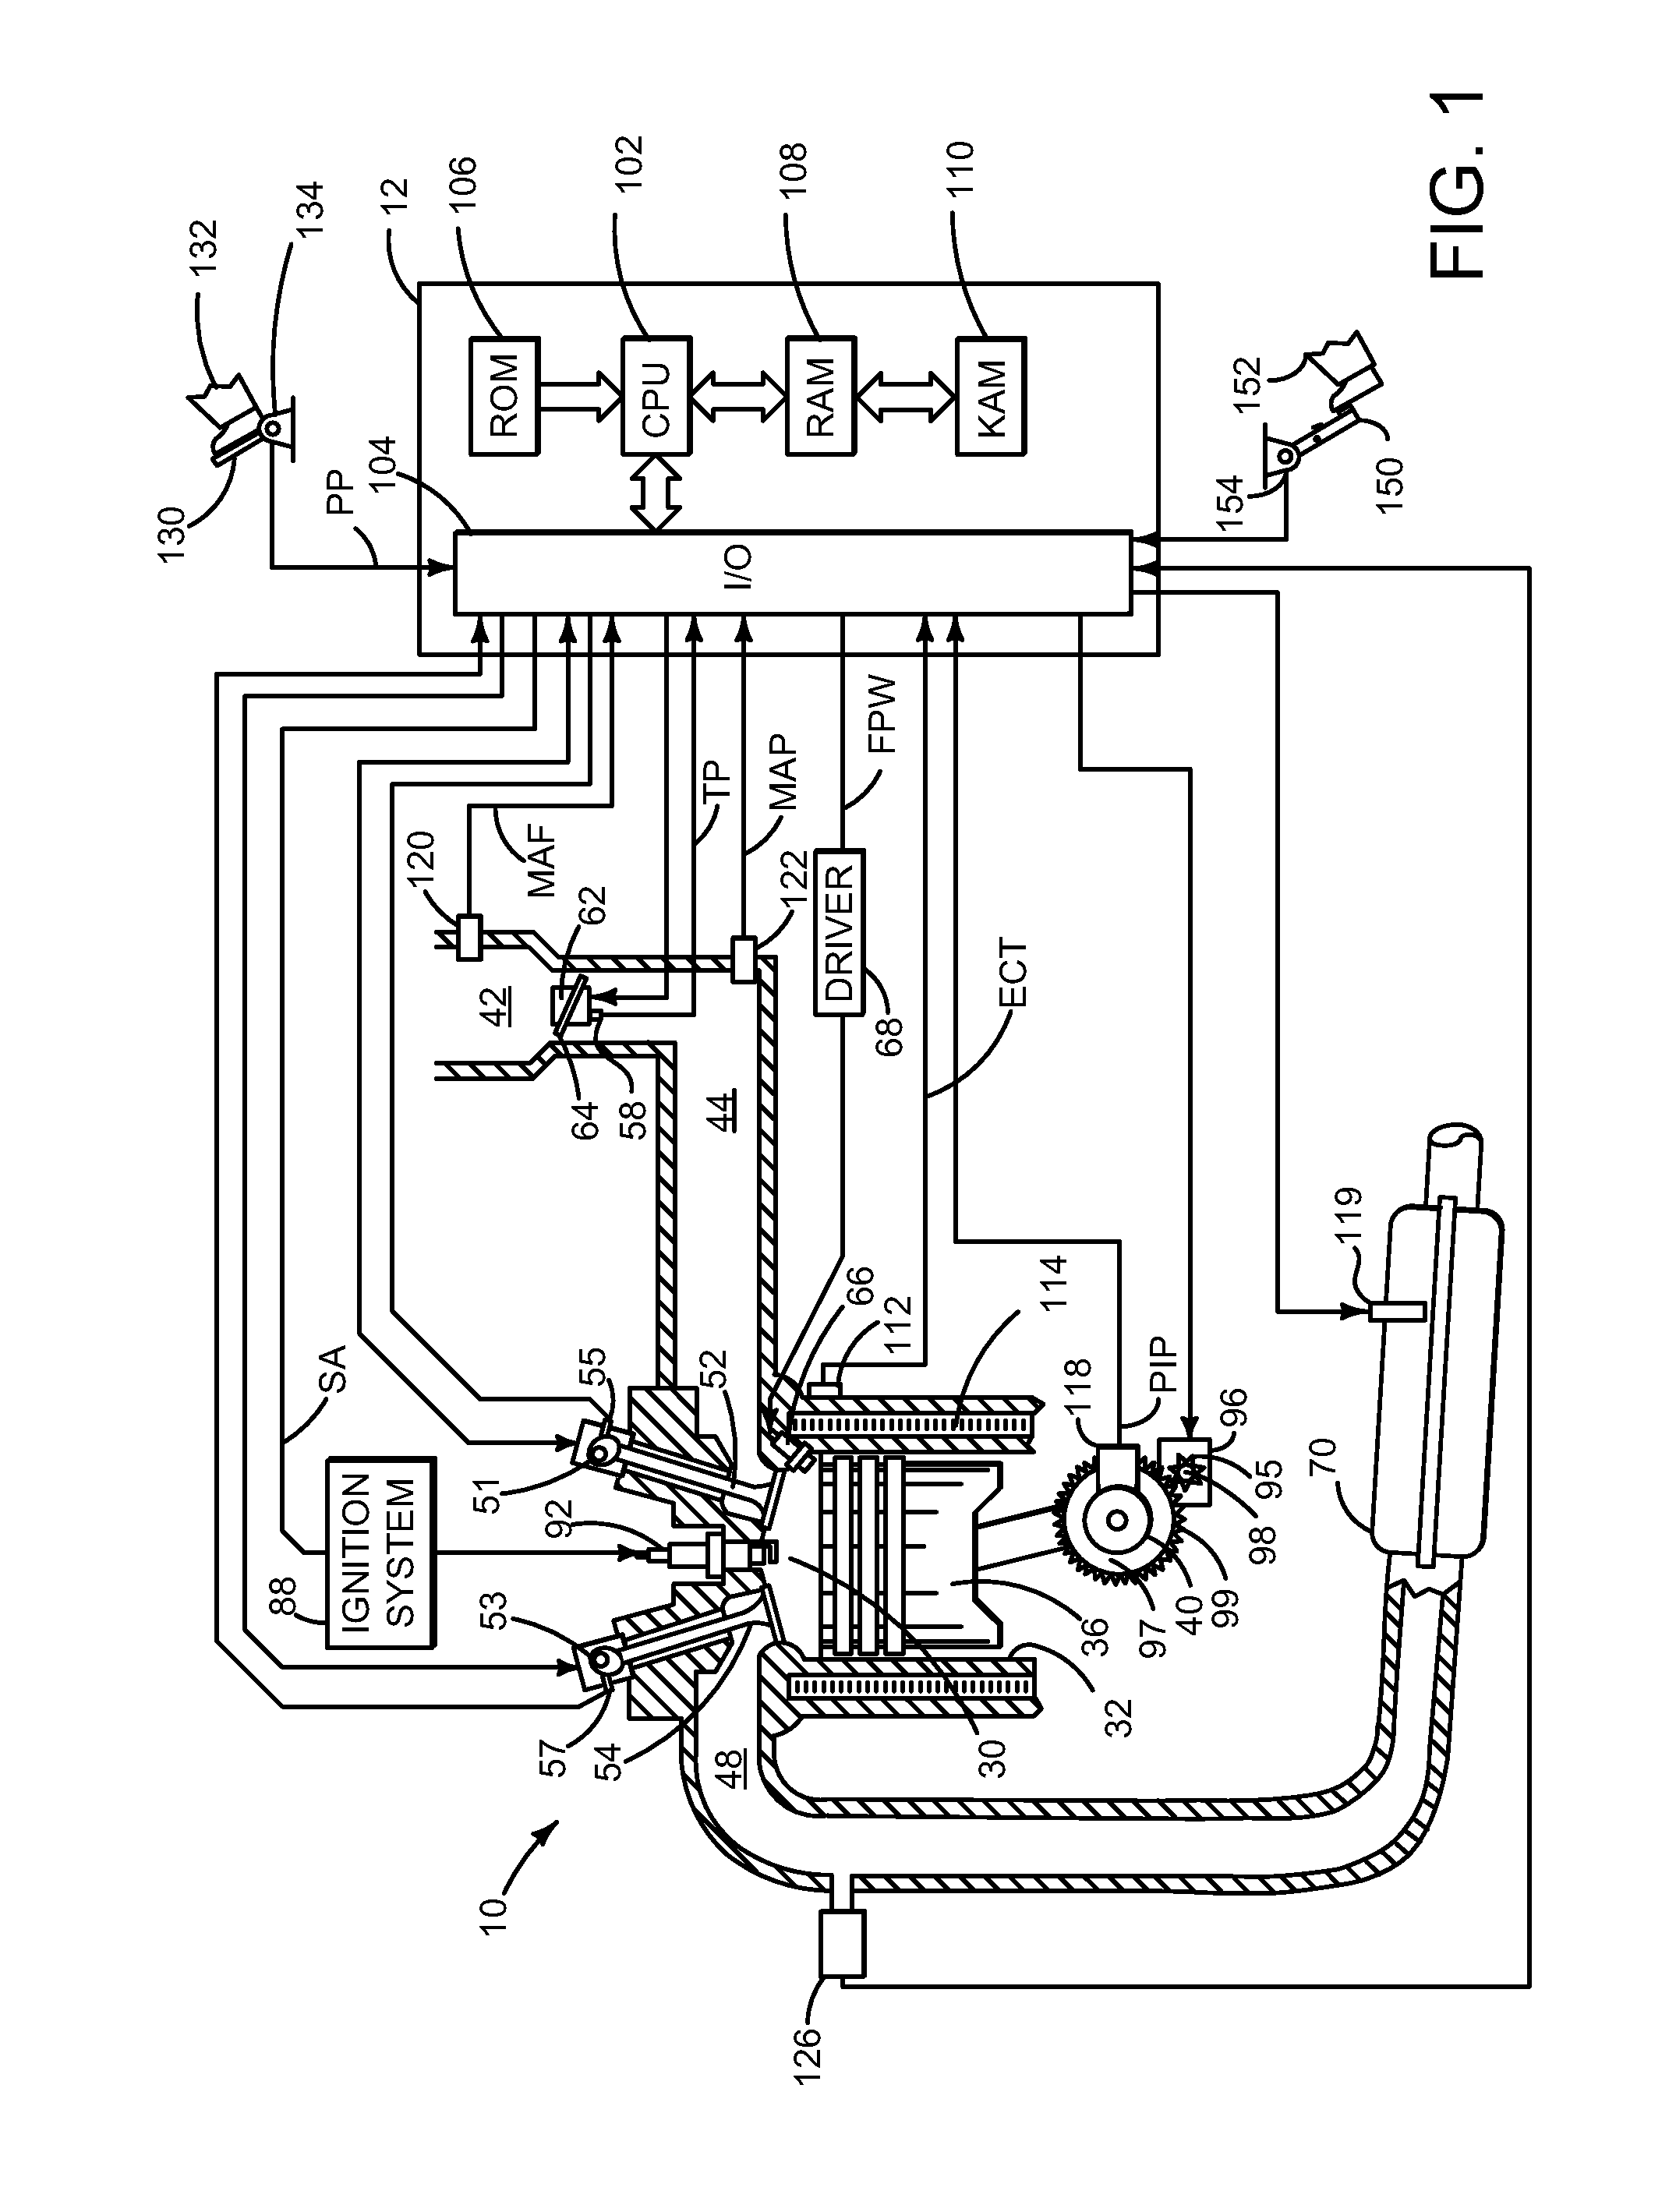 Methods and systems for operating a vehicle driveline